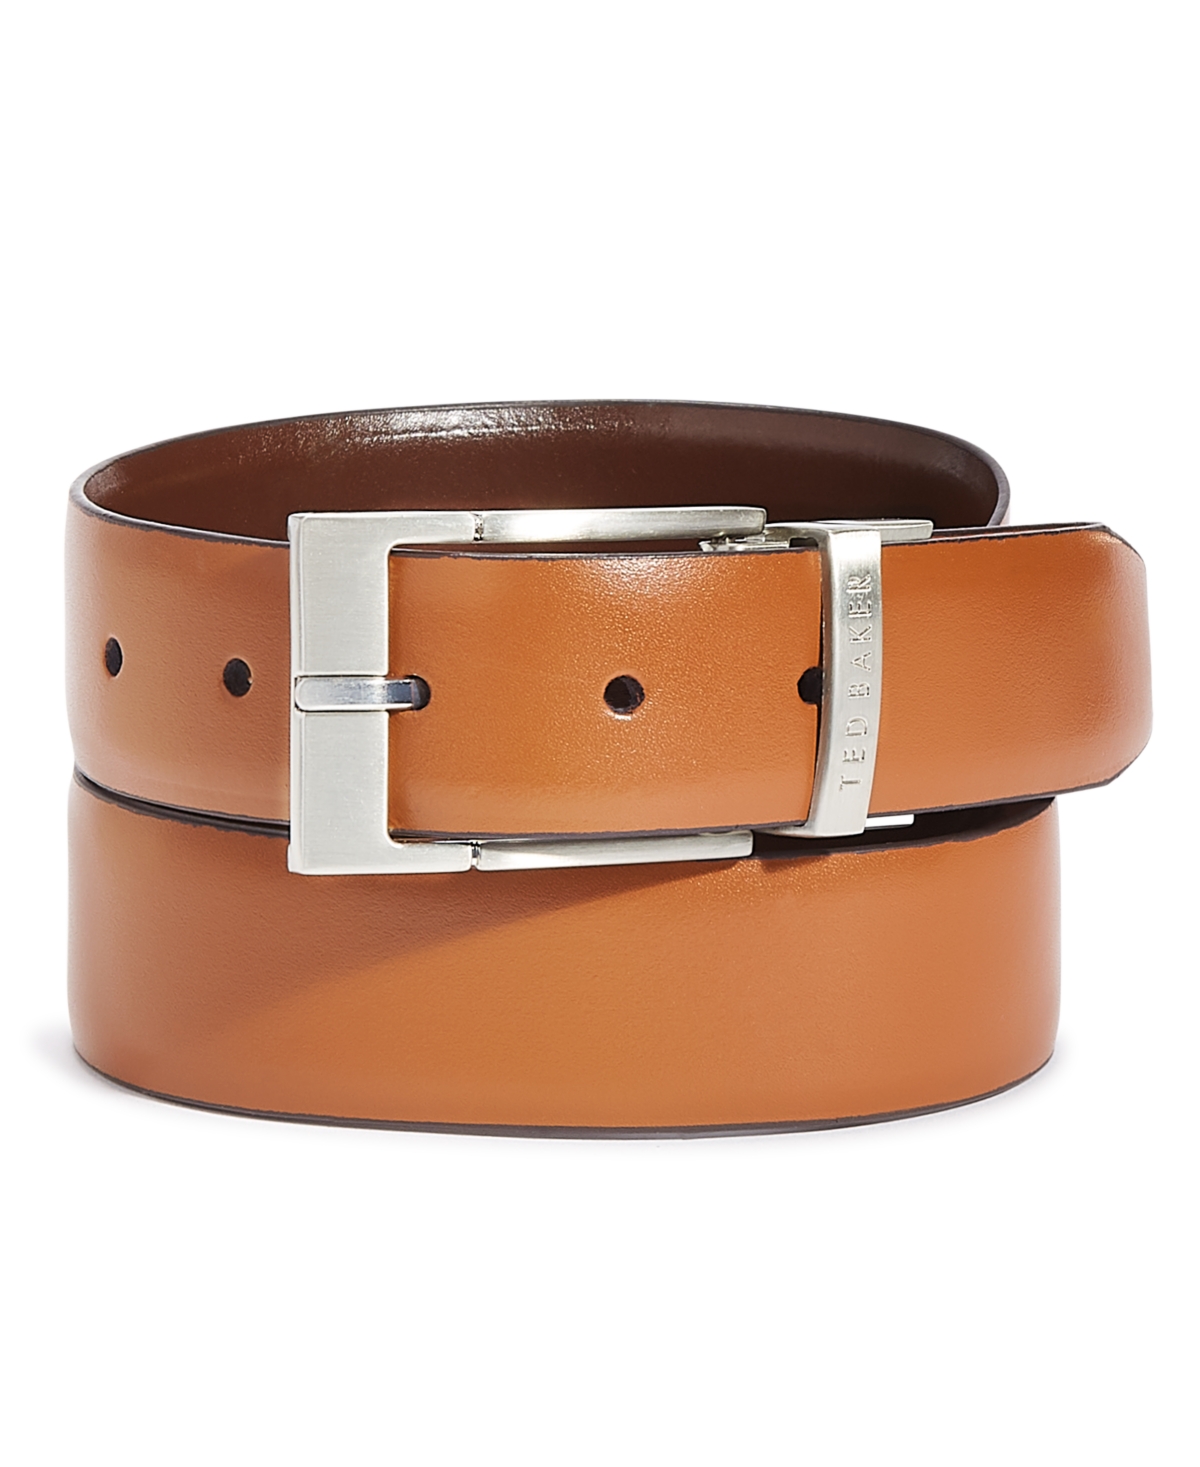 Men's Connary Leather Belt - Tan/Brown